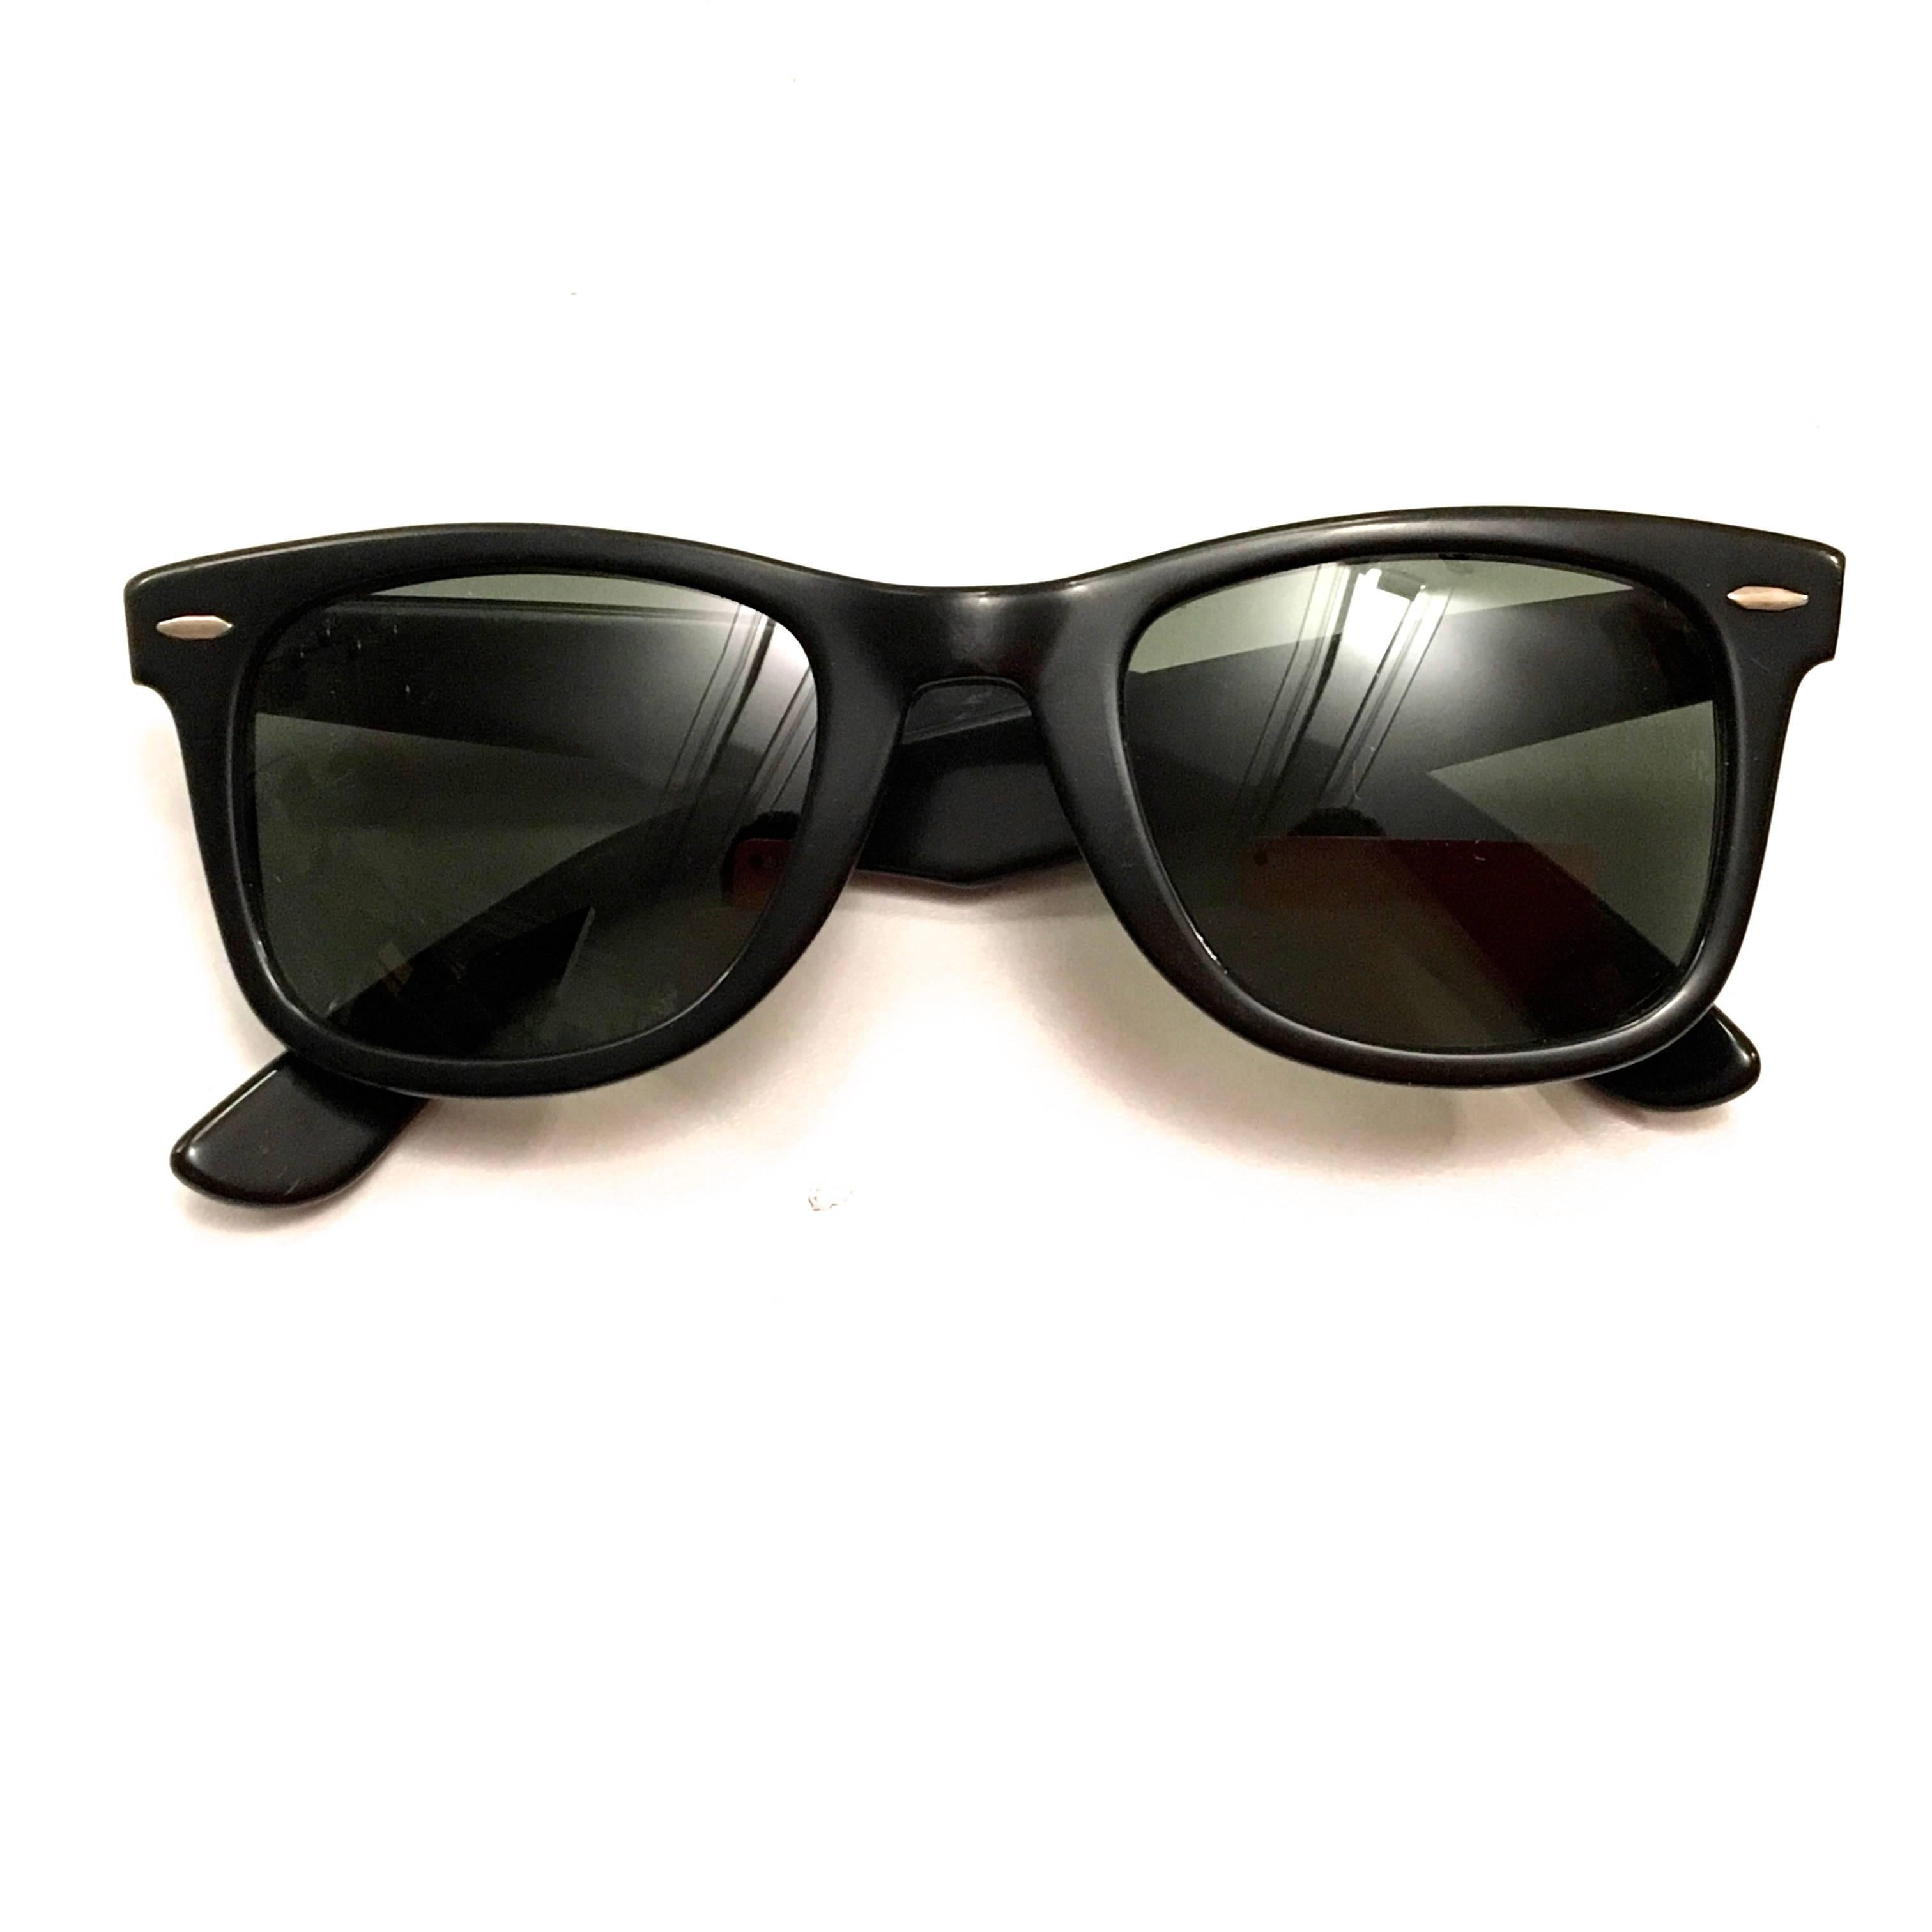 Presented here is a pair of Ray Ban Wayfarer sunglasses from the early 1960's. This stunning pair of sunglasses is in excellent condition, especially given their age. The glasses are engraved on the interior with 'Wayfarer' and 'B&L Rayban USA.' The